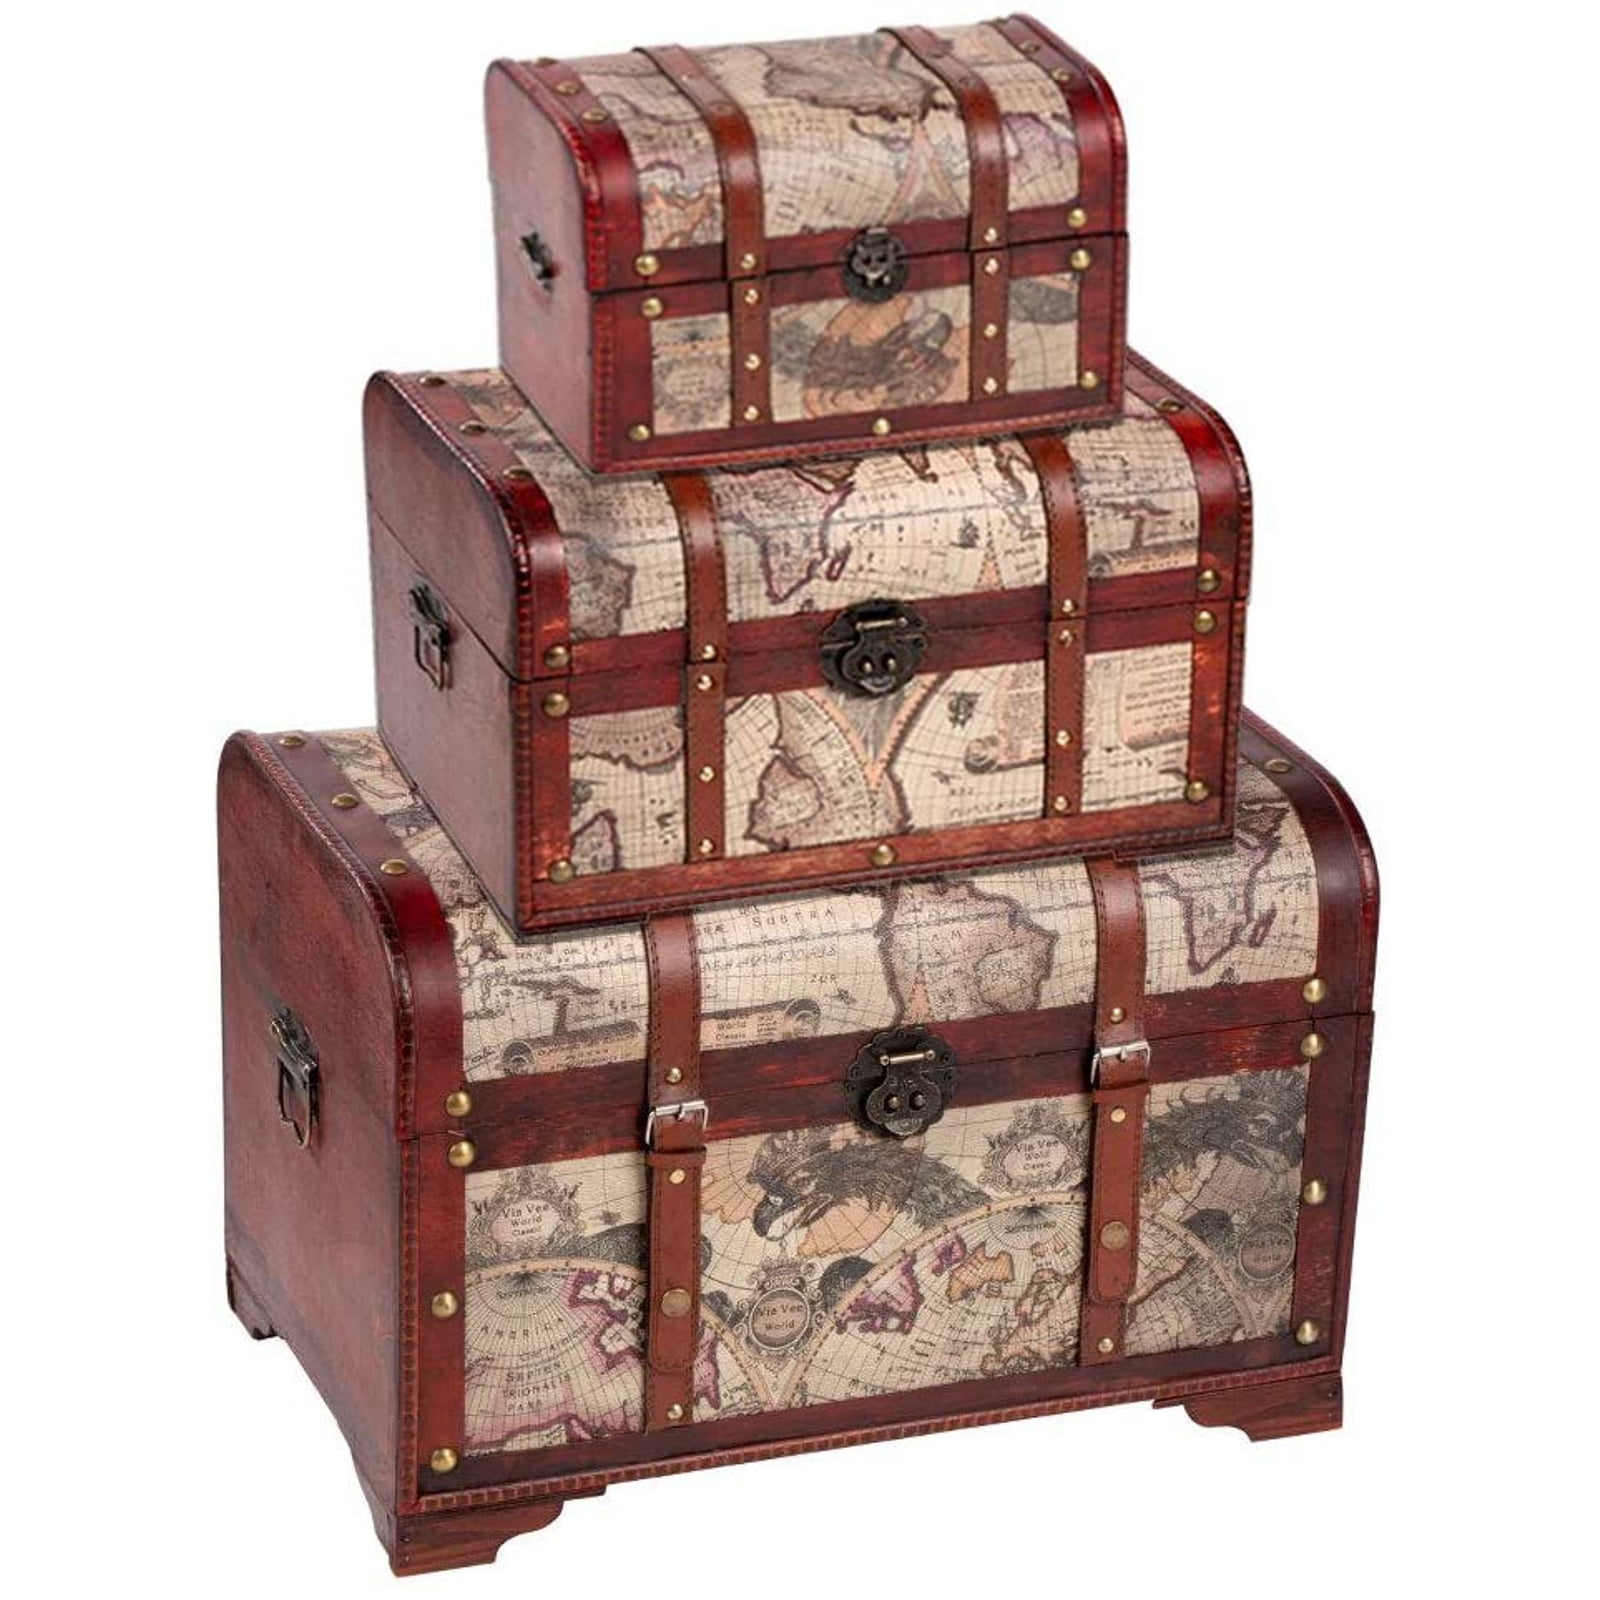 Large Wooden Treasure Chest Trunk Home Furniture Antique Storage Blanket Box US 